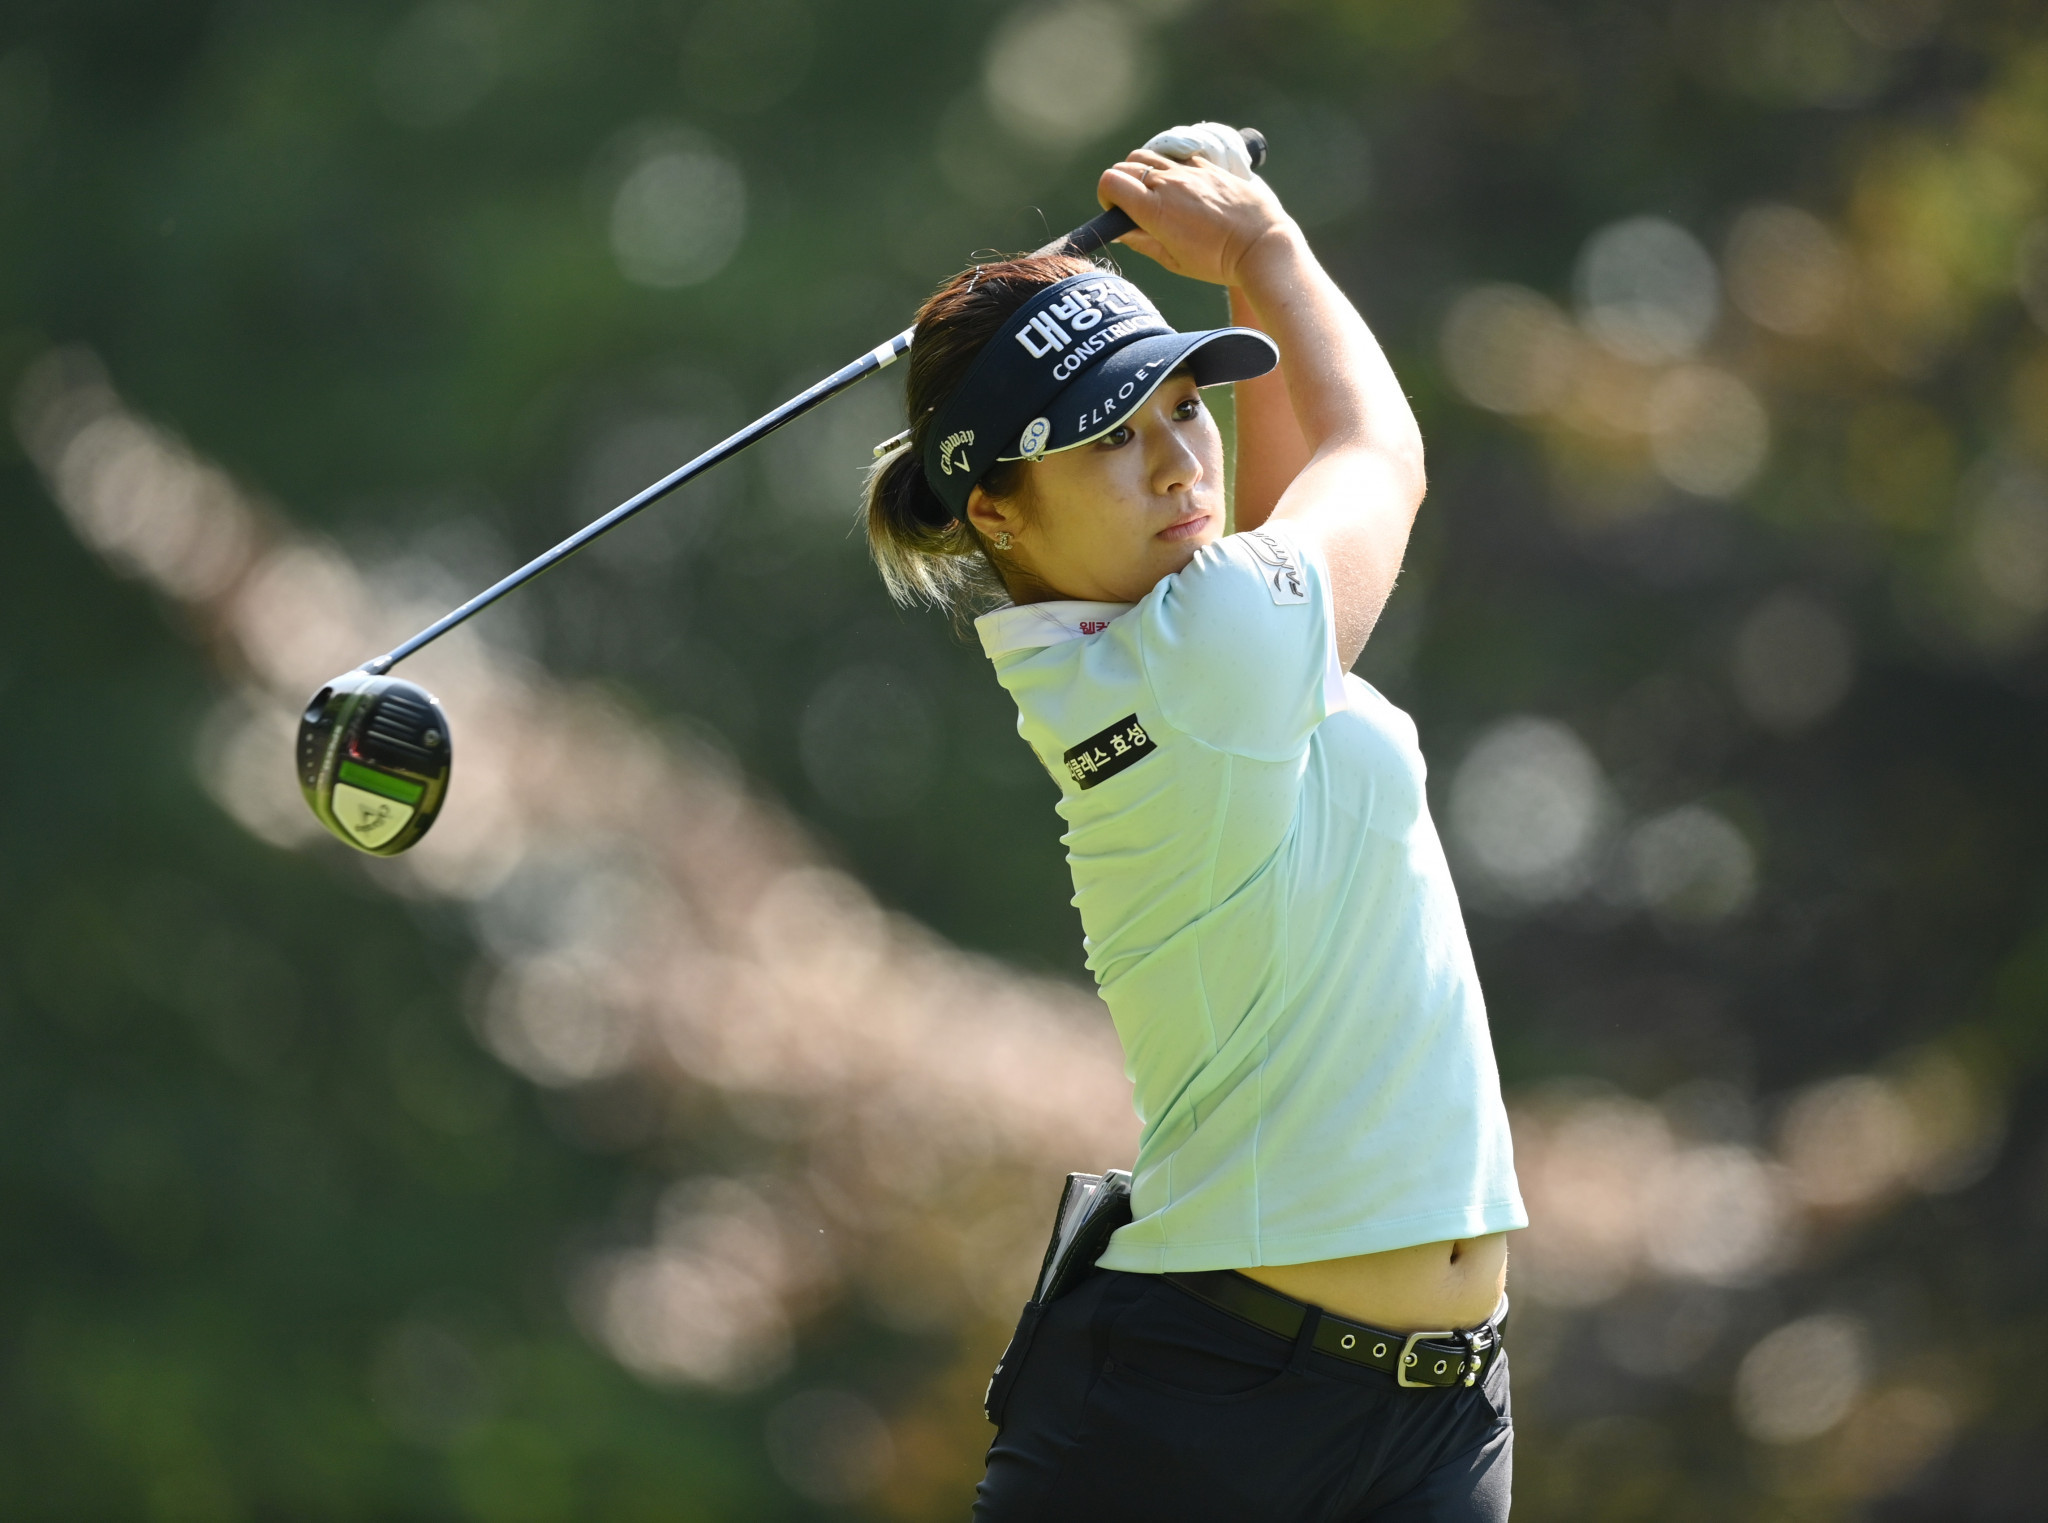 Record-equalling round of 61 gives Lee6 three-shot lead at Evian Championship